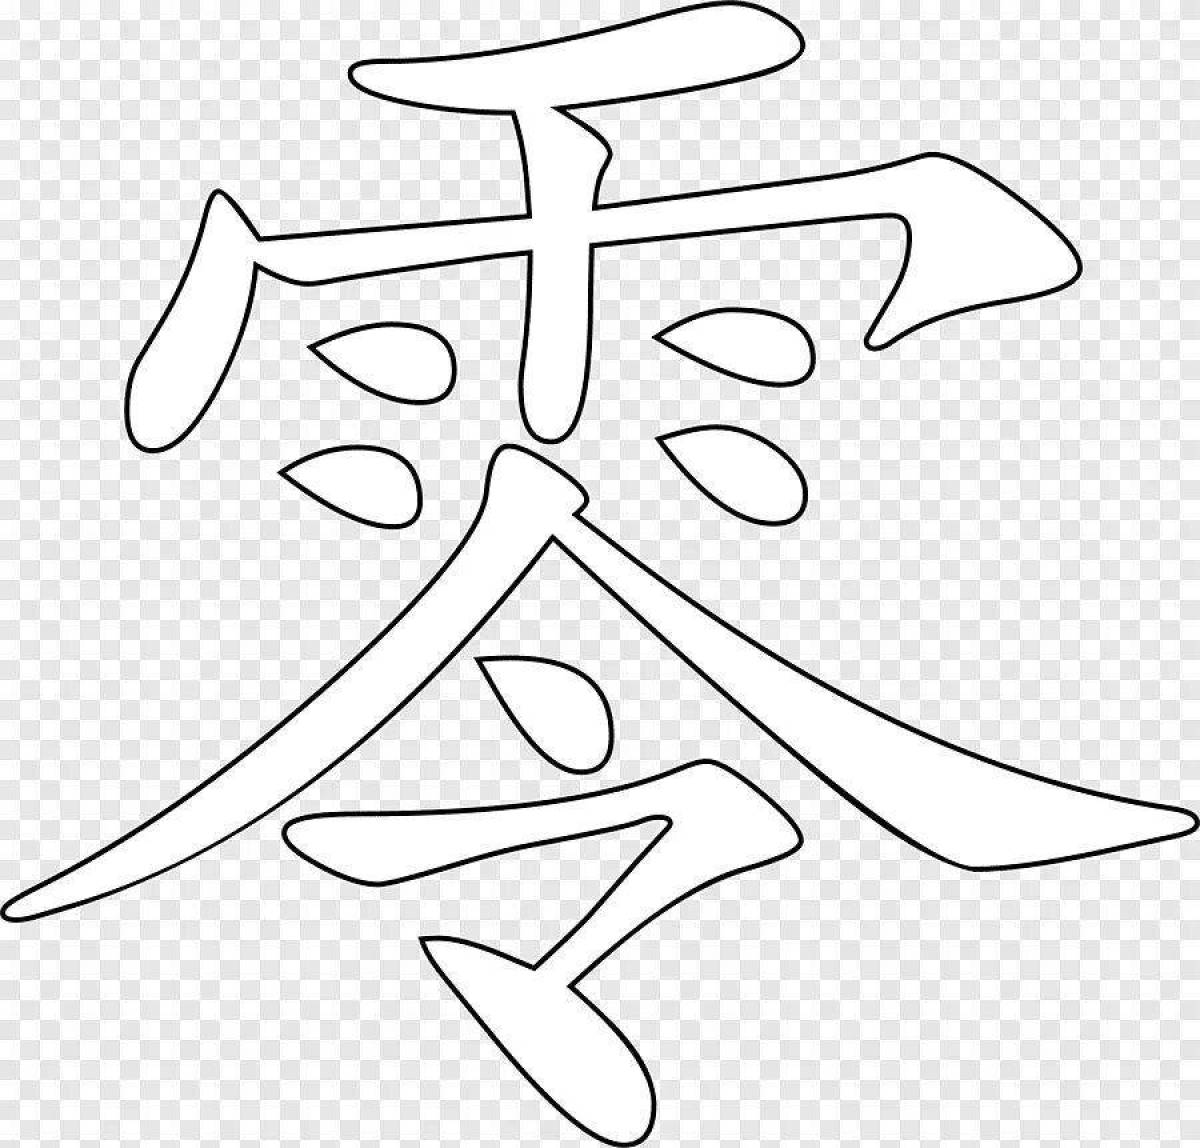 Color glowing chinese characters coloring page